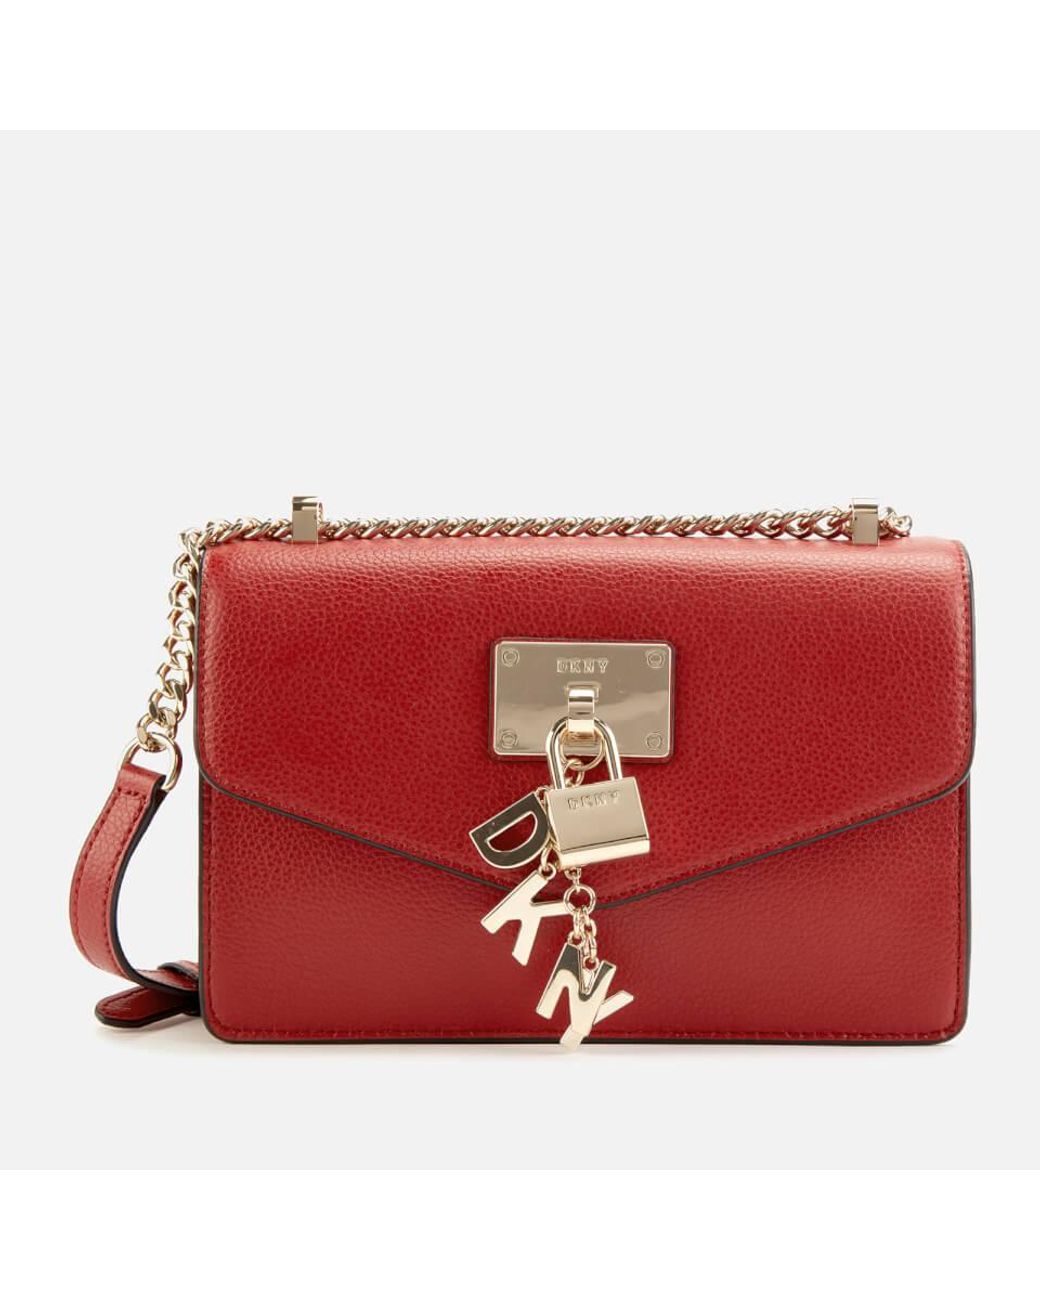 DKNY Elissa Small Shoulder Flap Bag in Red